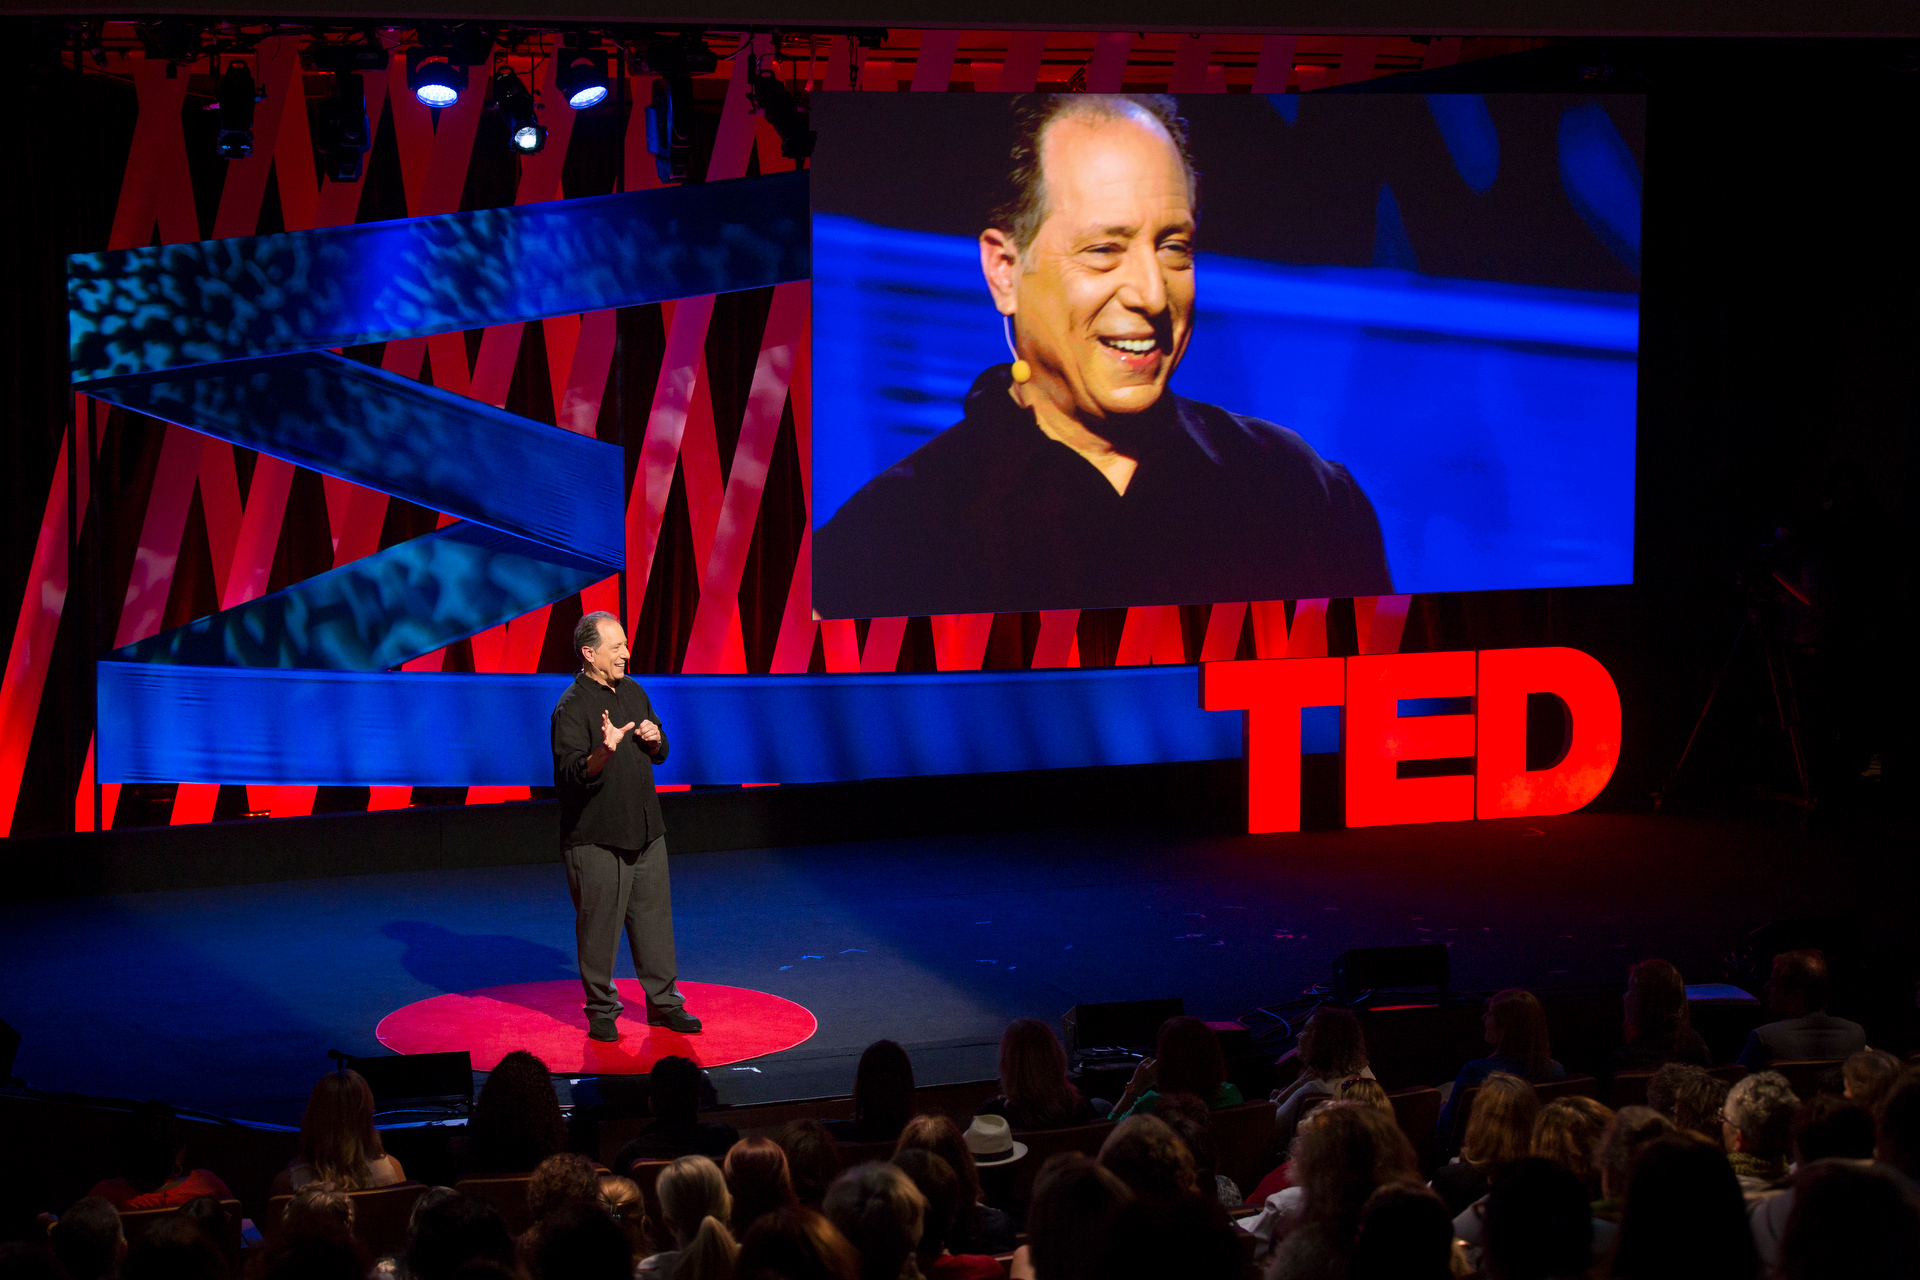 Michael Kimmel speaks at TEDWomen2015 - Momentum, Session 5, May 28, 2015, Monterey Conference Center, Monterey, California, USA. Photo: Marla Aufmuth/TED